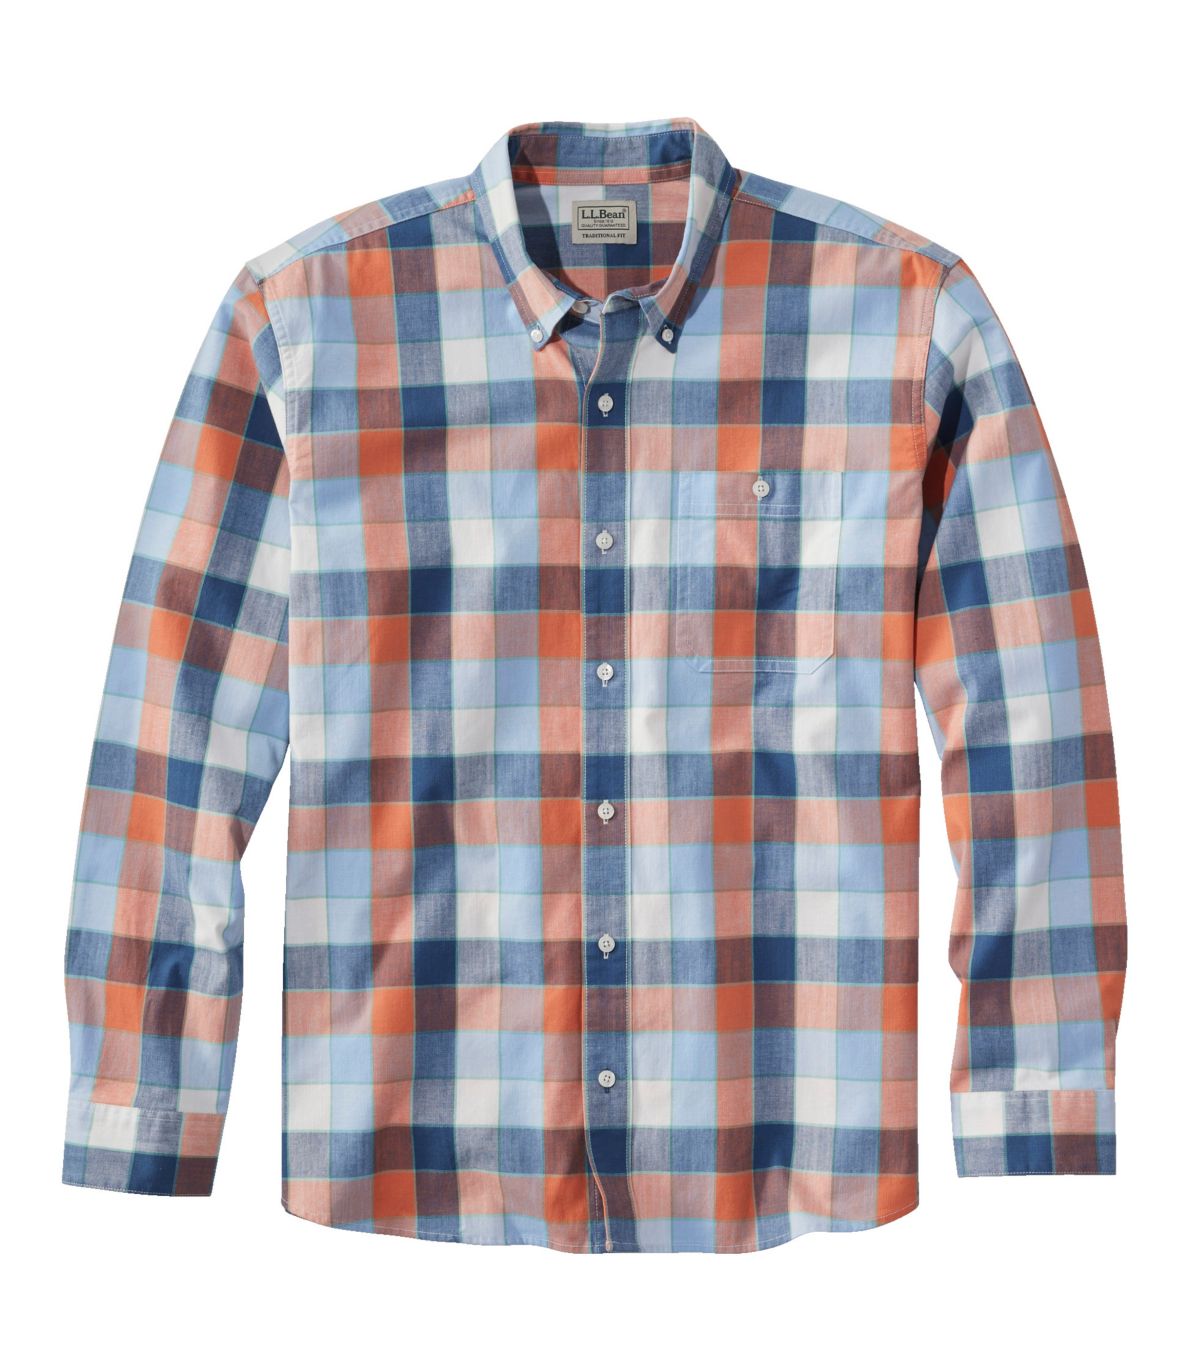 Men's Comfort Stretch Chambray Shirt, Traditional Untucked Fit, Long-Sleeve, Plaid